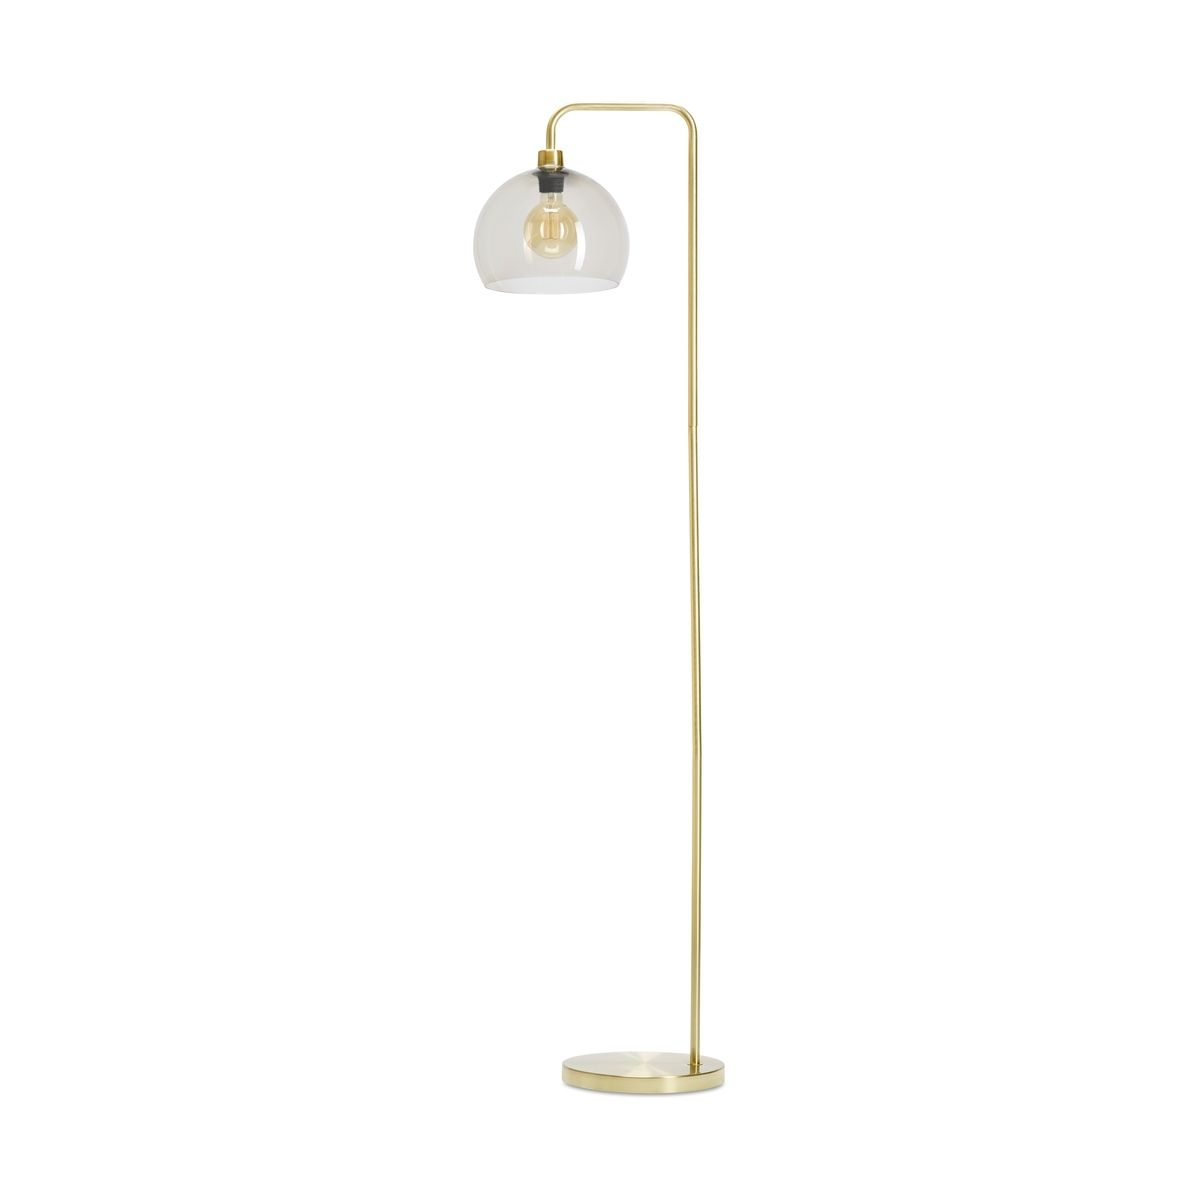 Brass Look Floor Lamp In 2019 Floor Lamp Shab Chic intended for dimensions 1200 X 1200